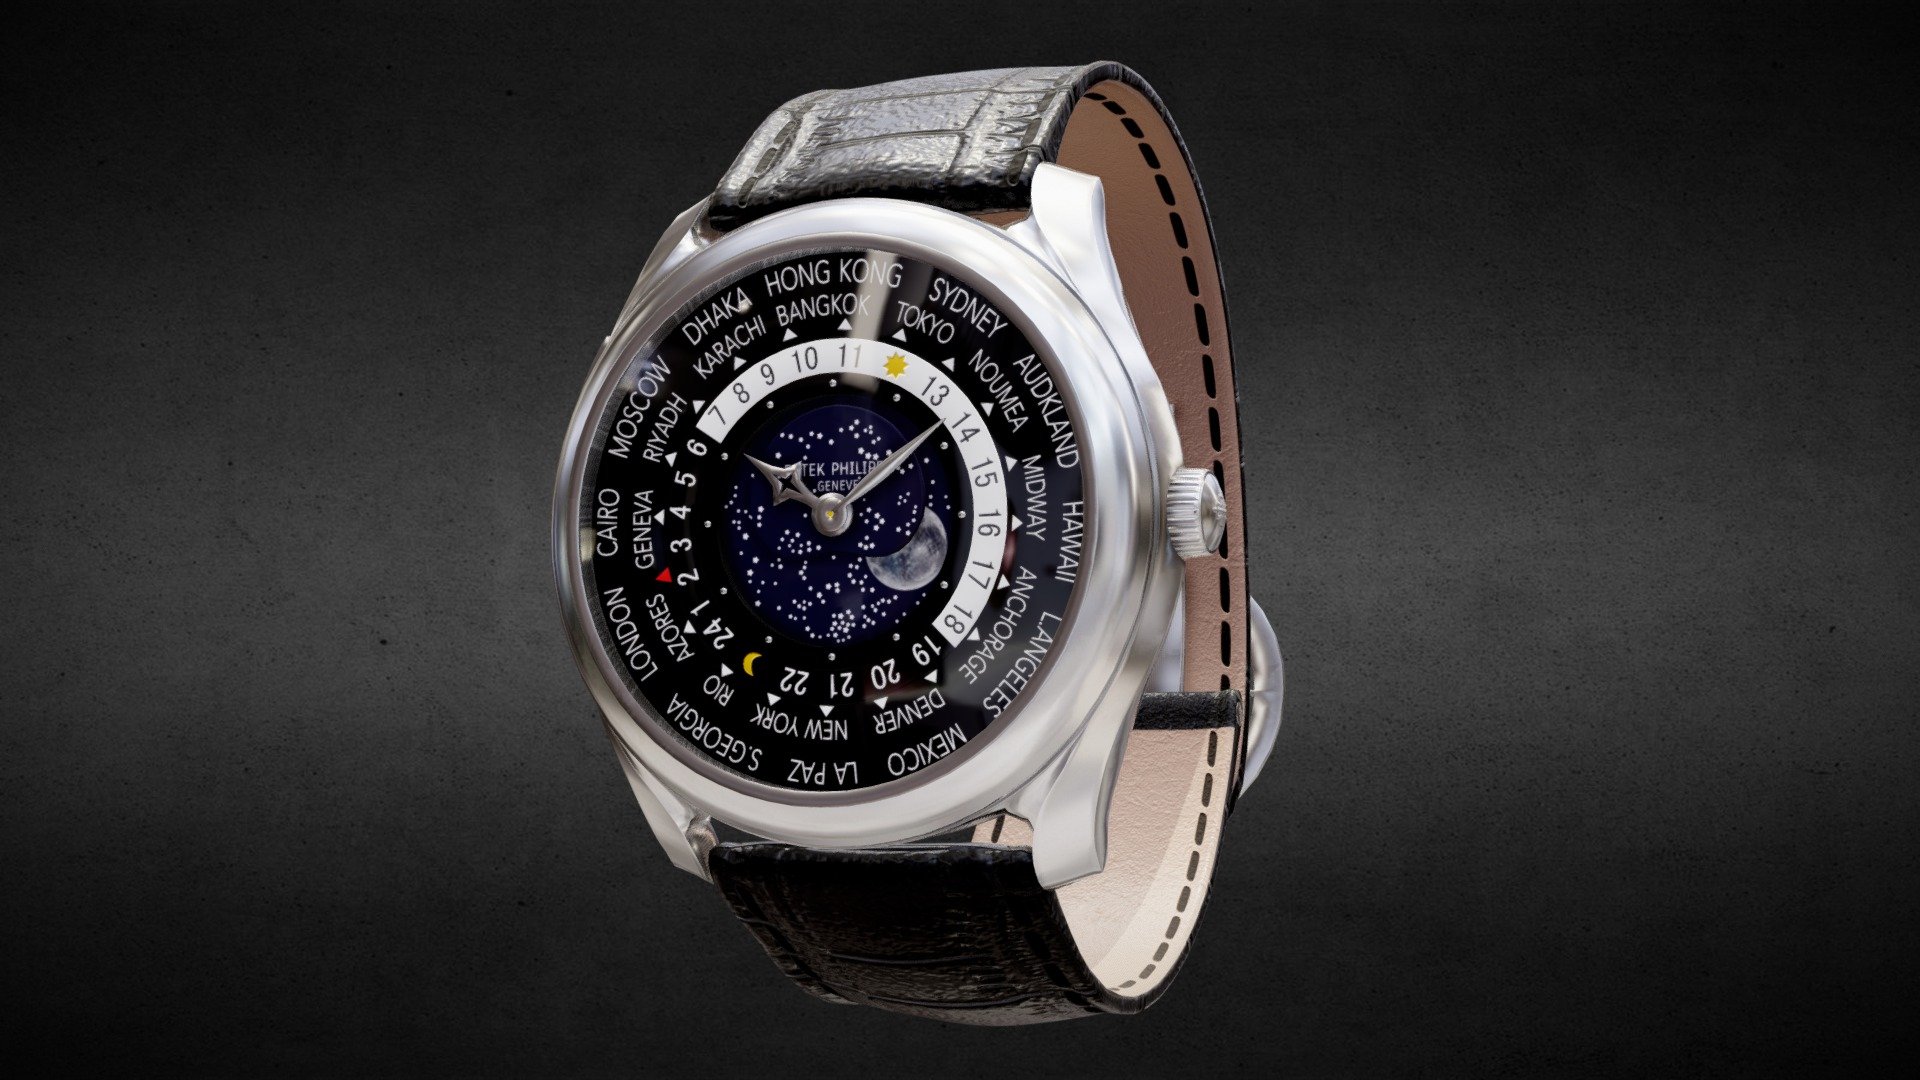 Awesome stainless steel Patek Philippe Limited Editions 5575G watch․
Use for Unreal Engine 4 and Unity3D. Try in augmented reality in the AR-Watches app. 
Links to the app: Android, iOS

Currently available for download in FBX format.

3D model developed by AR-Watches

Disclaimer: We do not own the design of the watch, we only made the 3D model 3d model